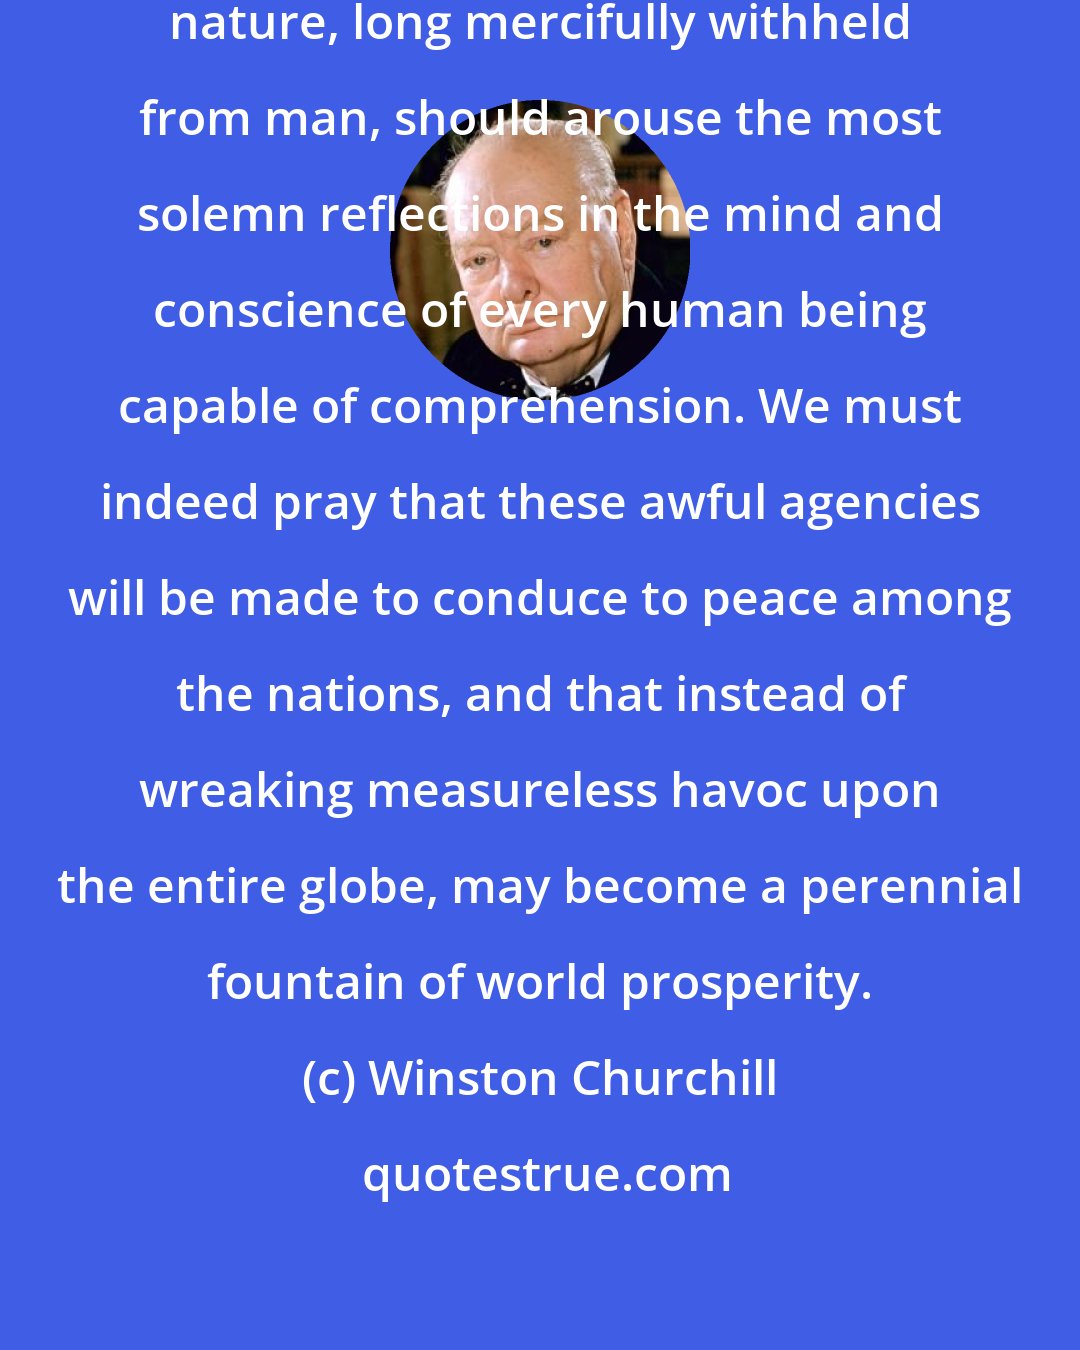 Winston Churchill: This revelation of the secrets of nature, long mercifully withheld from man, should arouse the most solemn reflections in the mind and conscience of every human being capable of comprehension. We must indeed pray that these awful agencies will be made to conduce to peace among the nations, and that instead of wreaking measureless havoc upon the entire globe, may become a perennial fountain of world prosperity.